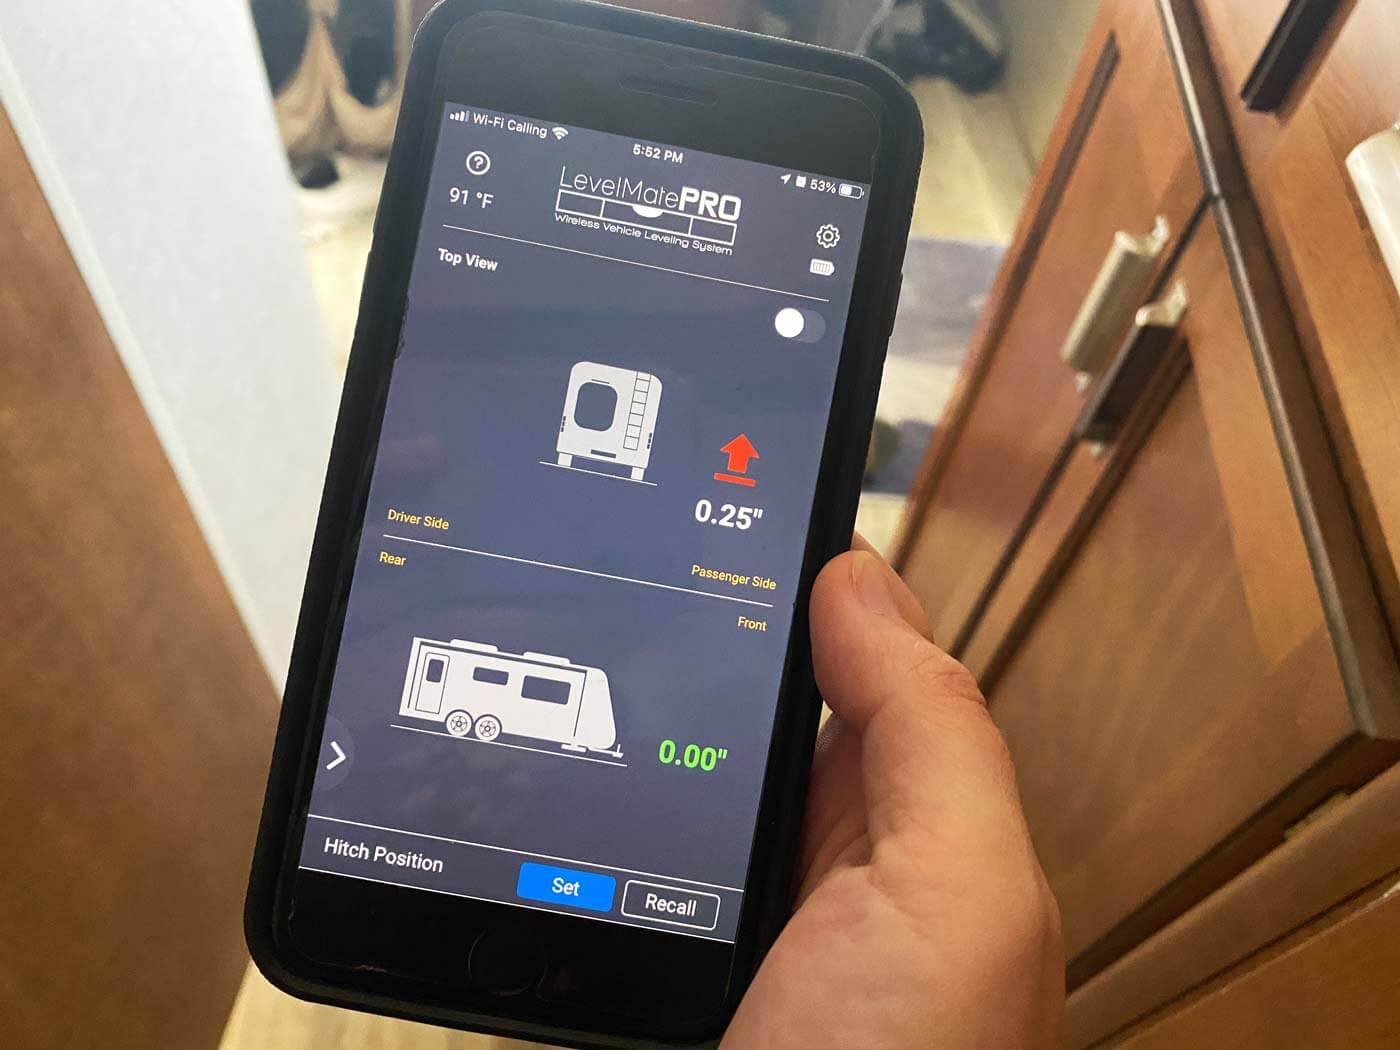 Level Mate Pro app for leveling an RV running on an iPhone.